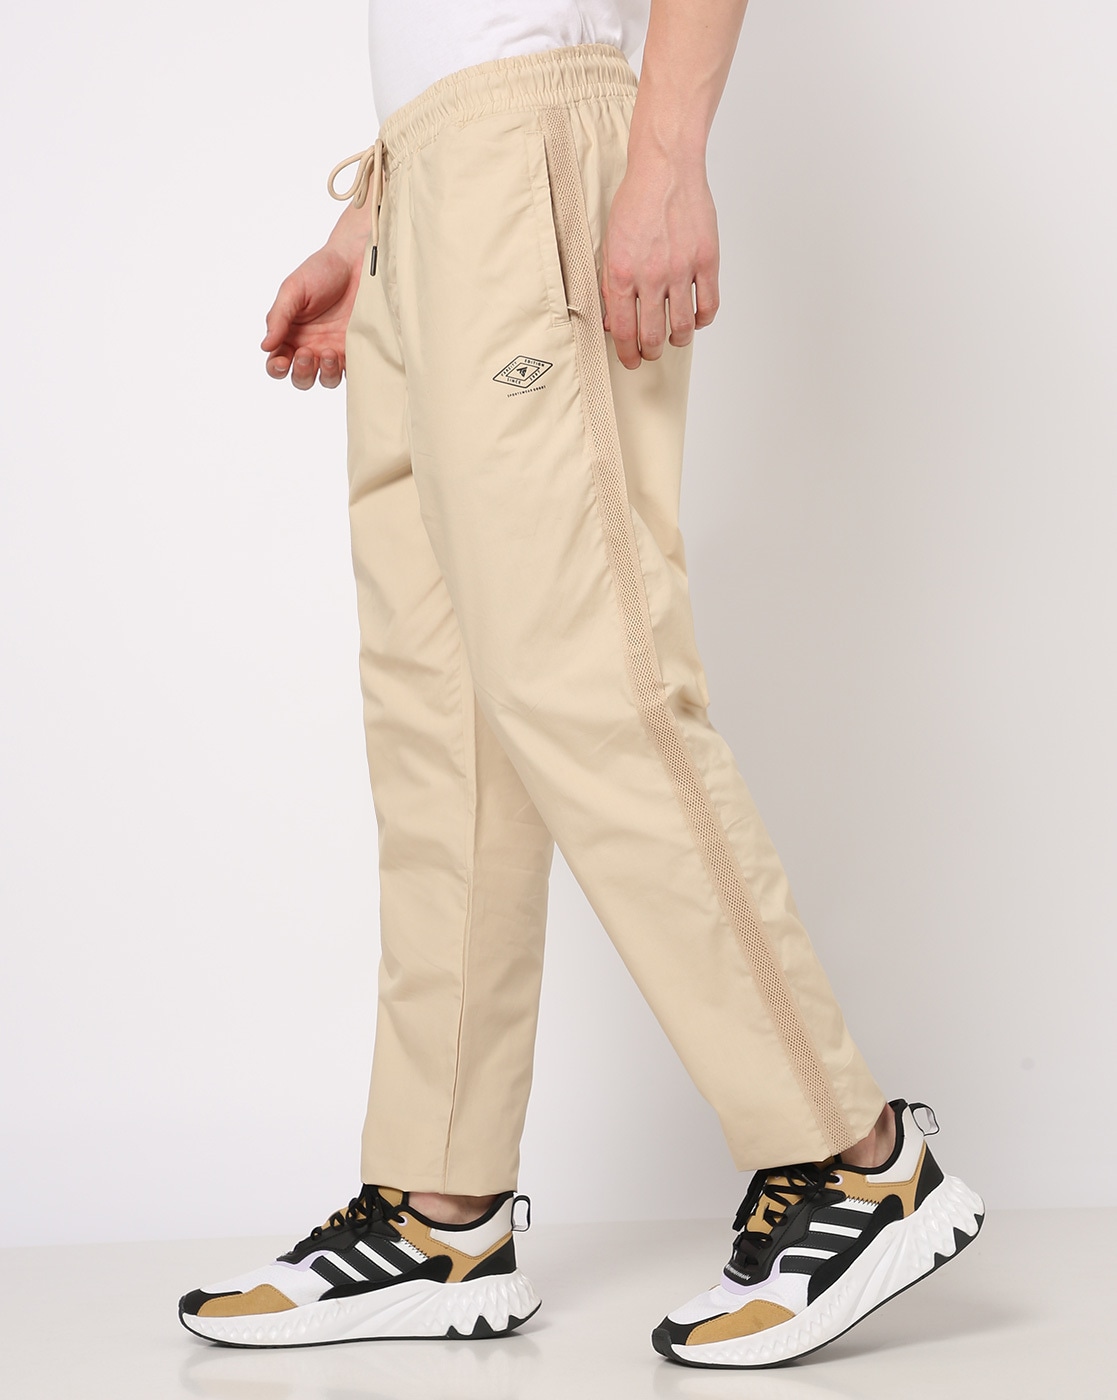 10 Best Track Pants for Men in India 2021(Nike, HRX, and Adidas) | mybest